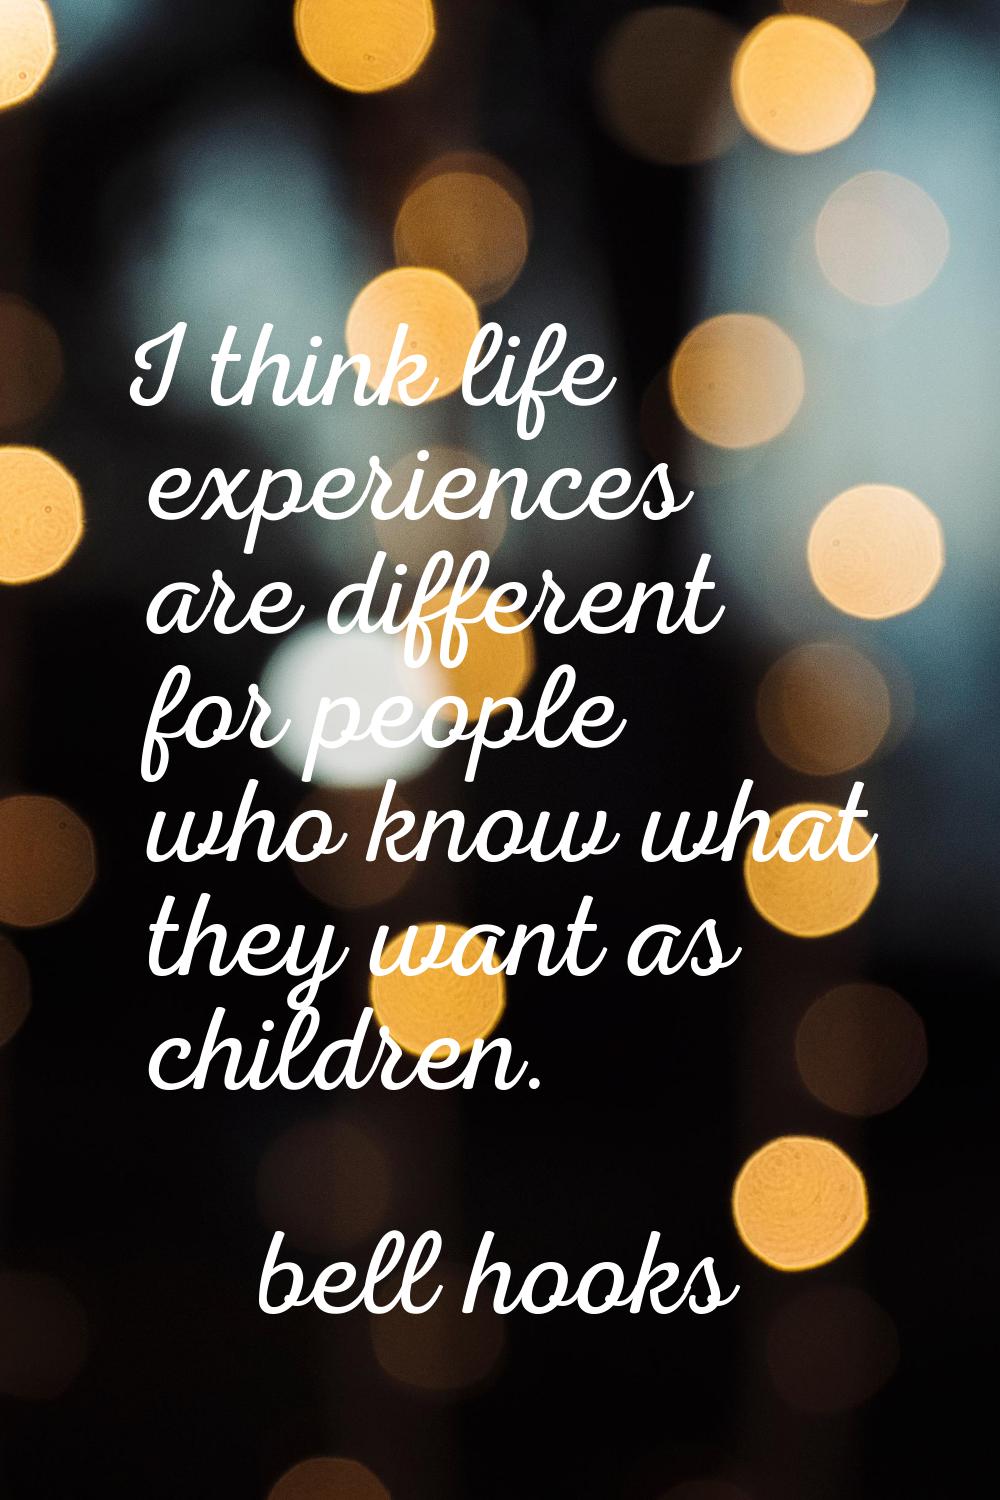 I think life experiences are different for people who know what they want as children.